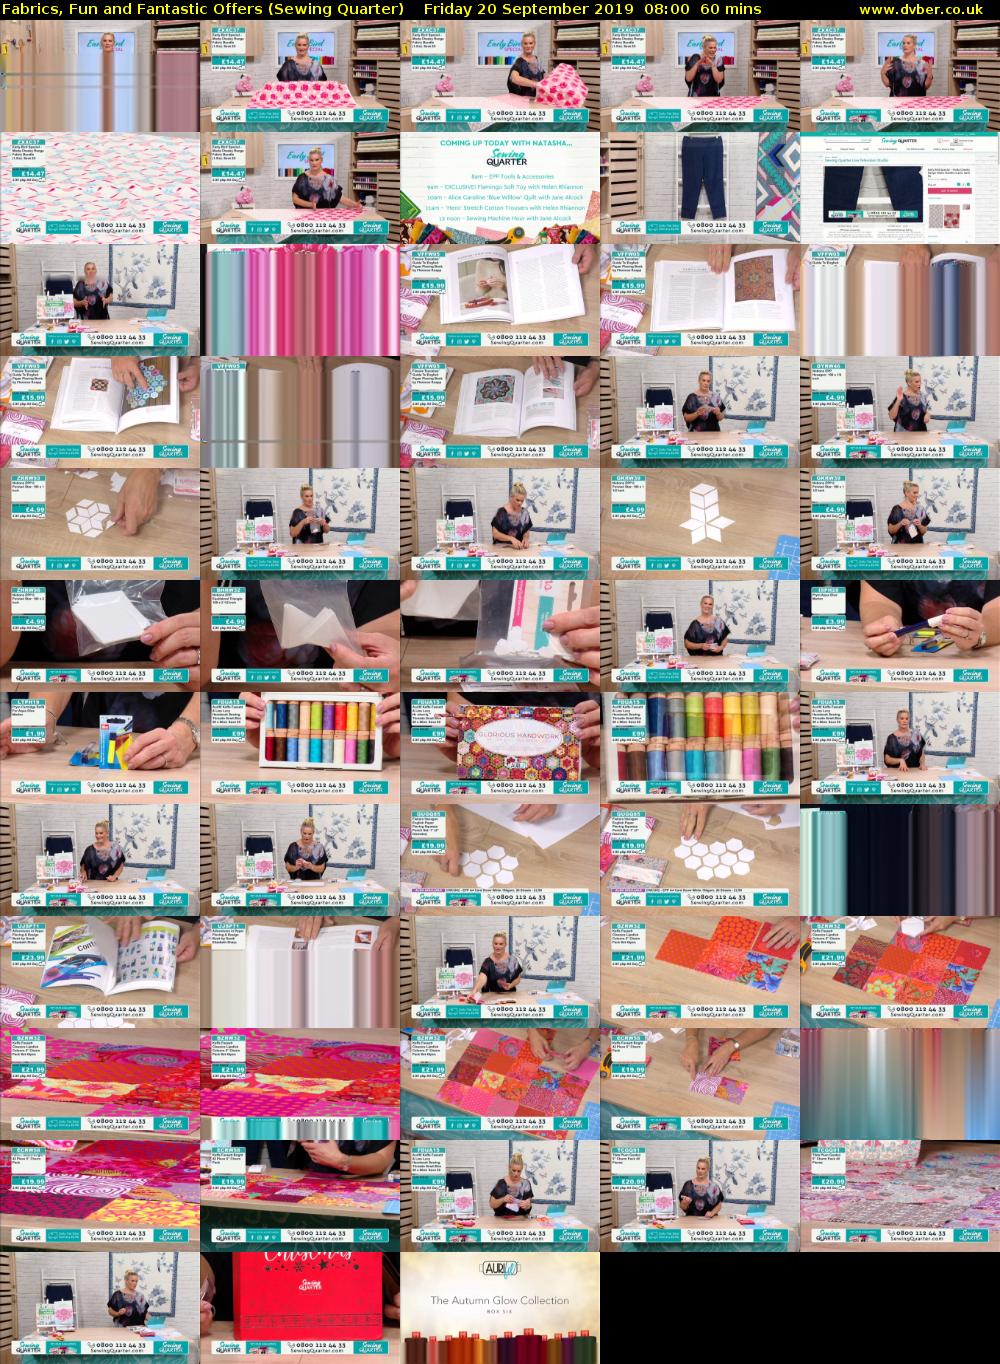 Fabrics, Fun and Fantastic Offers (Sewing Quarter) Friday 20 September 2019 08:00 - 09:00